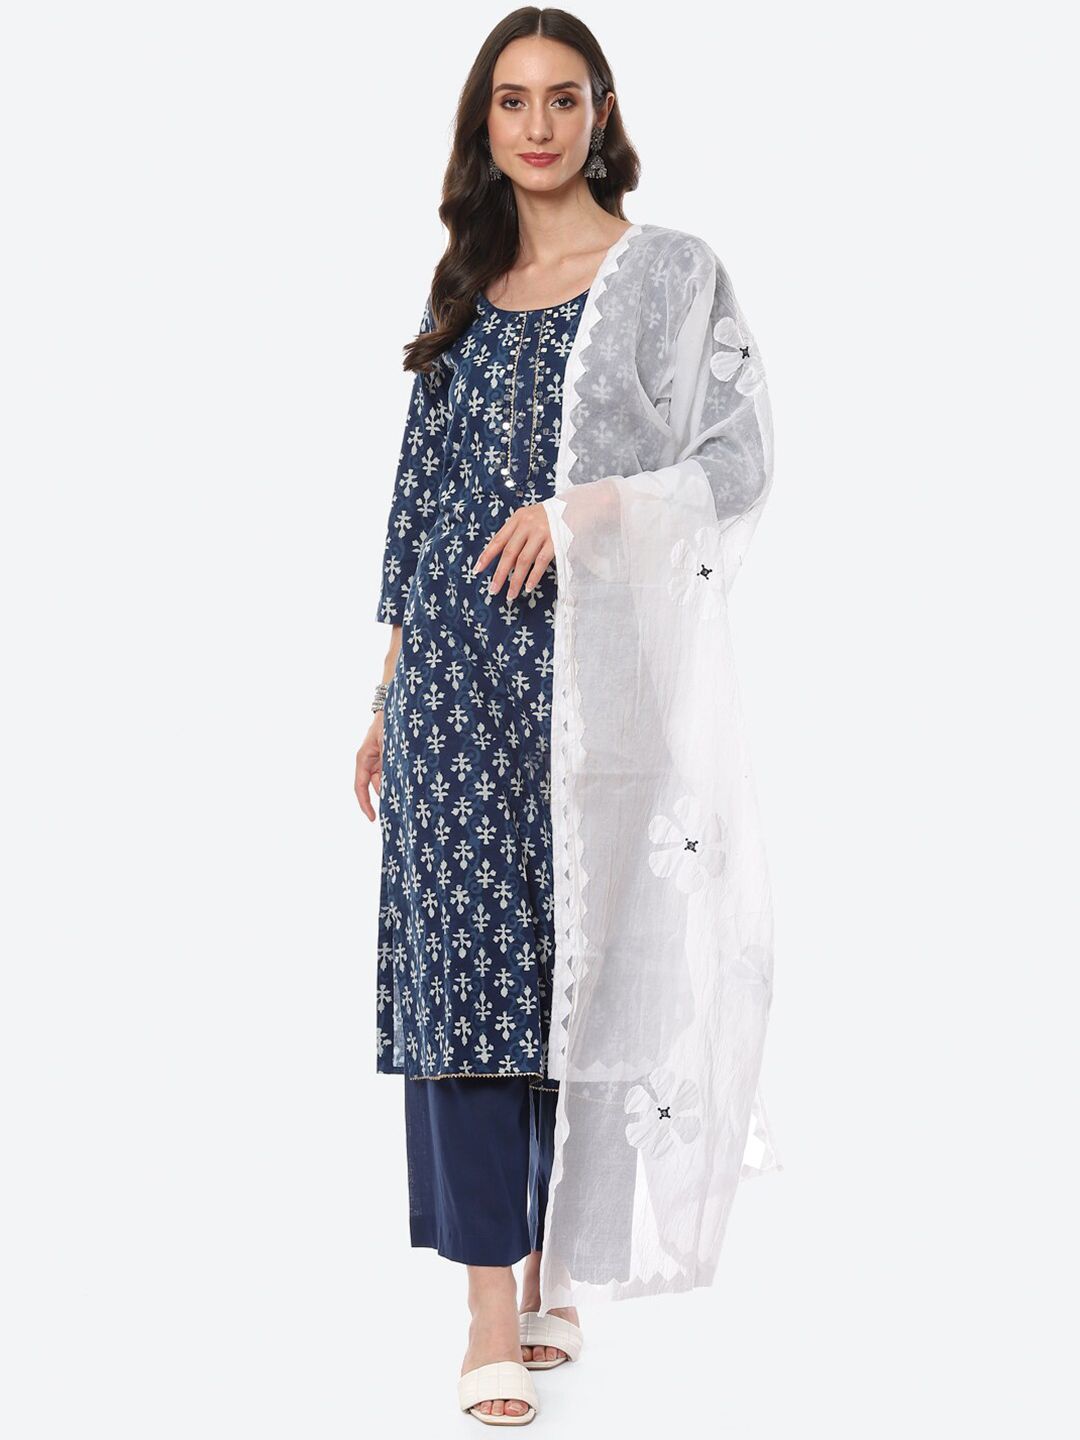 Meena Bazaar Navy Blue & White Printed Pure Cotton Unstitched Dress Material Price in India